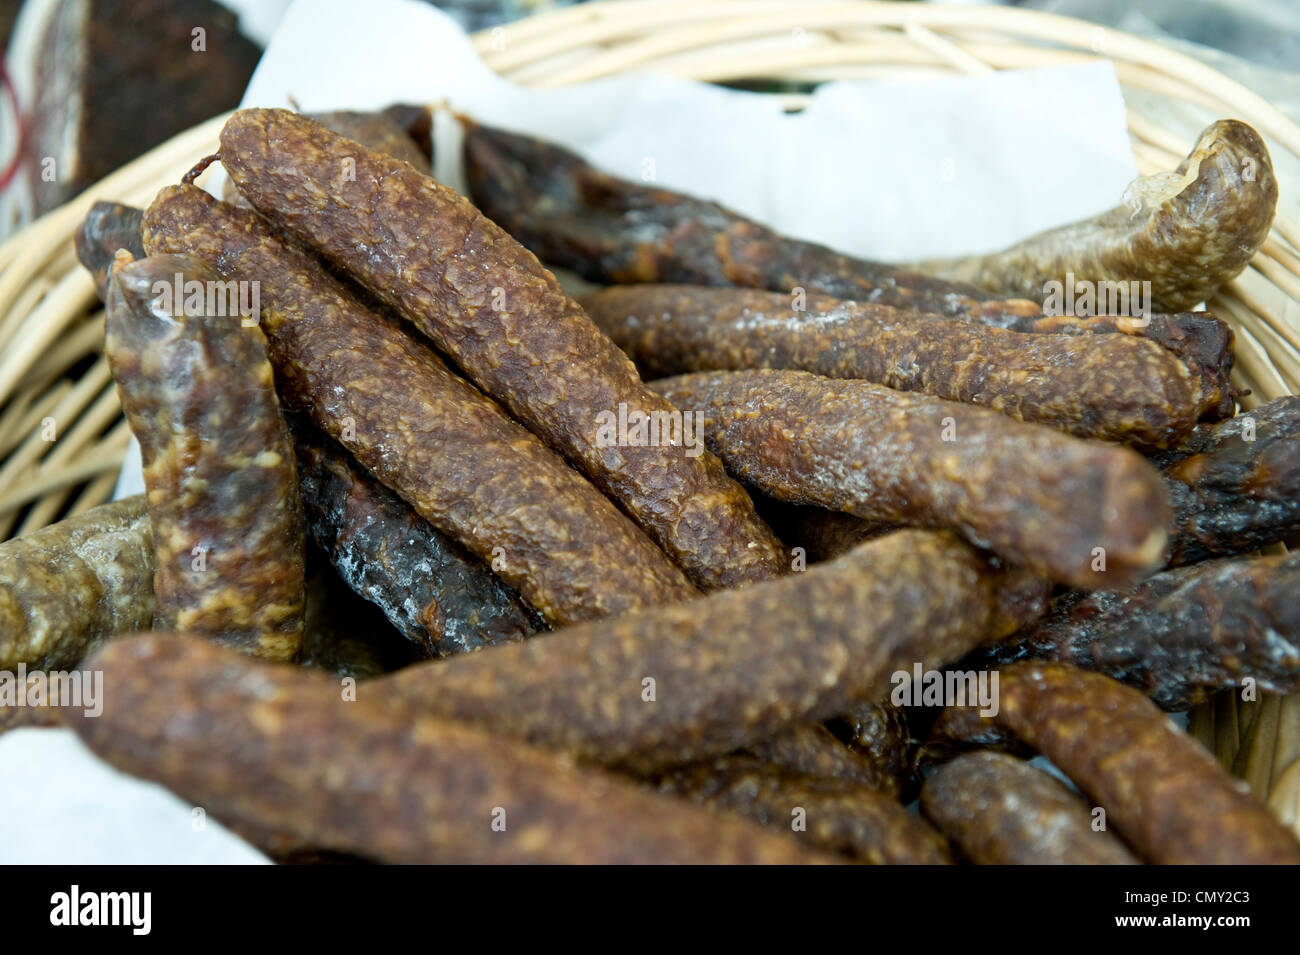 A closeup of dry salami in a wooden basket. Stock Photo